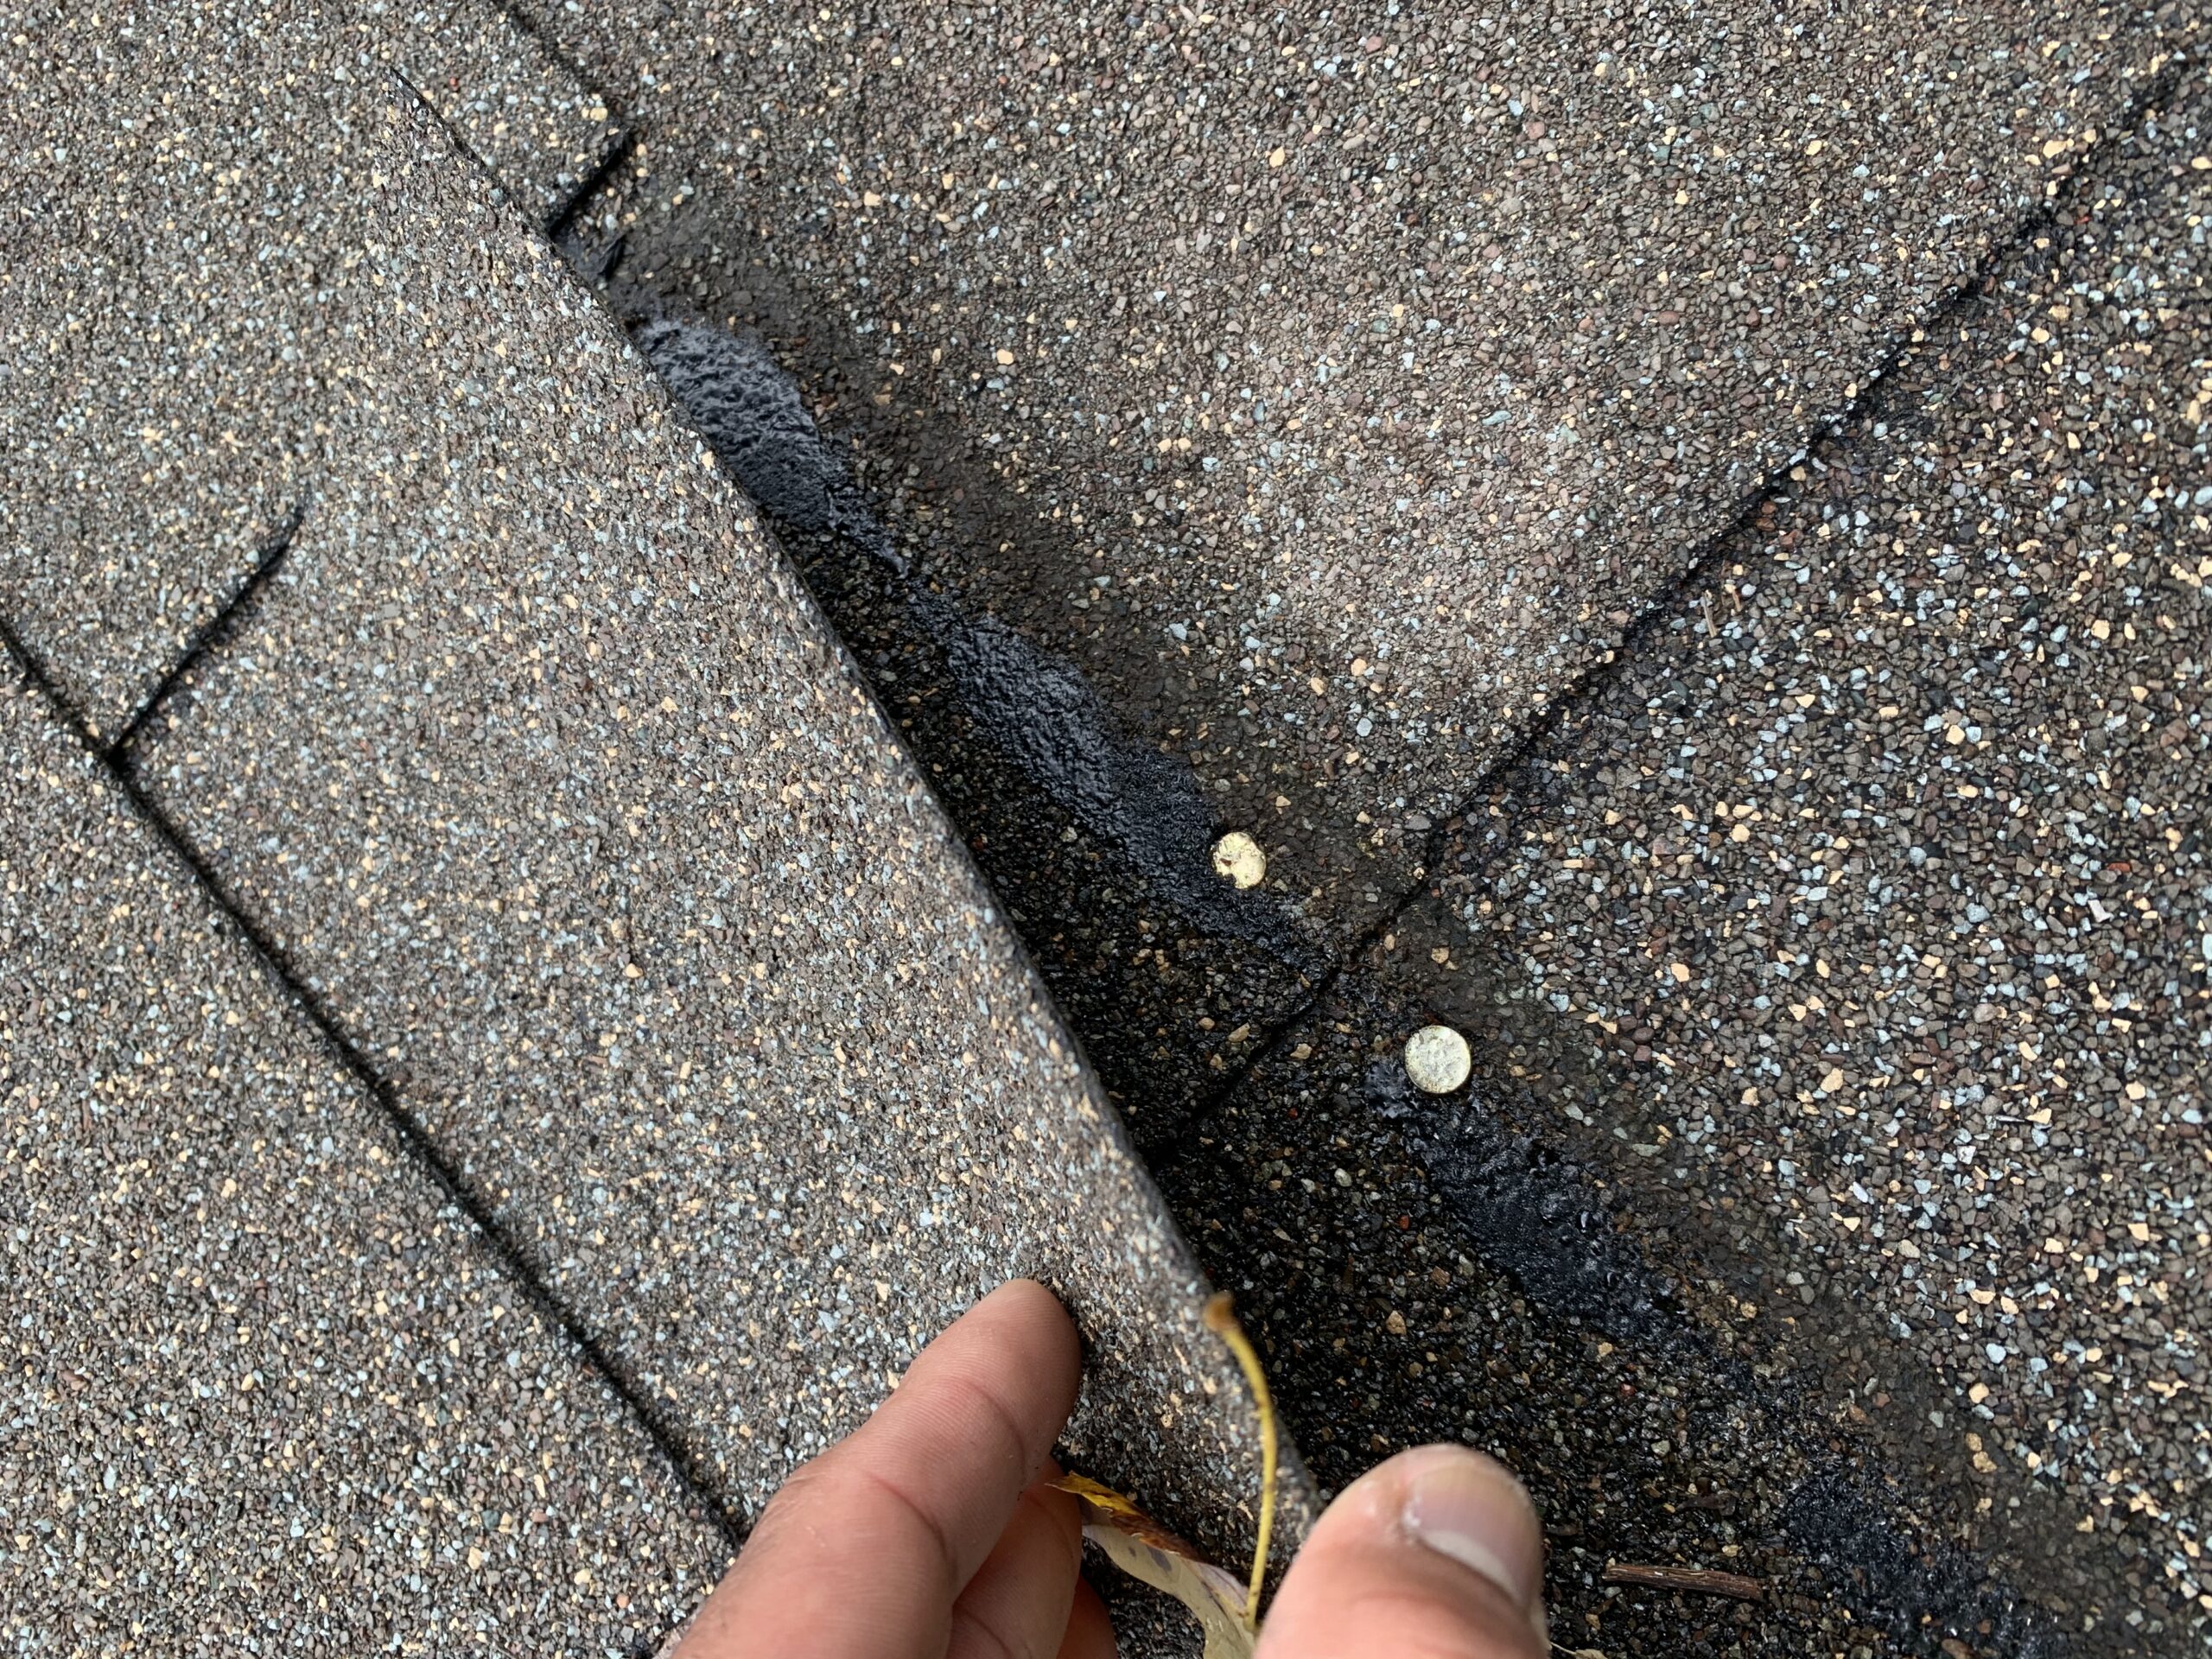 Exposed nails in shingles